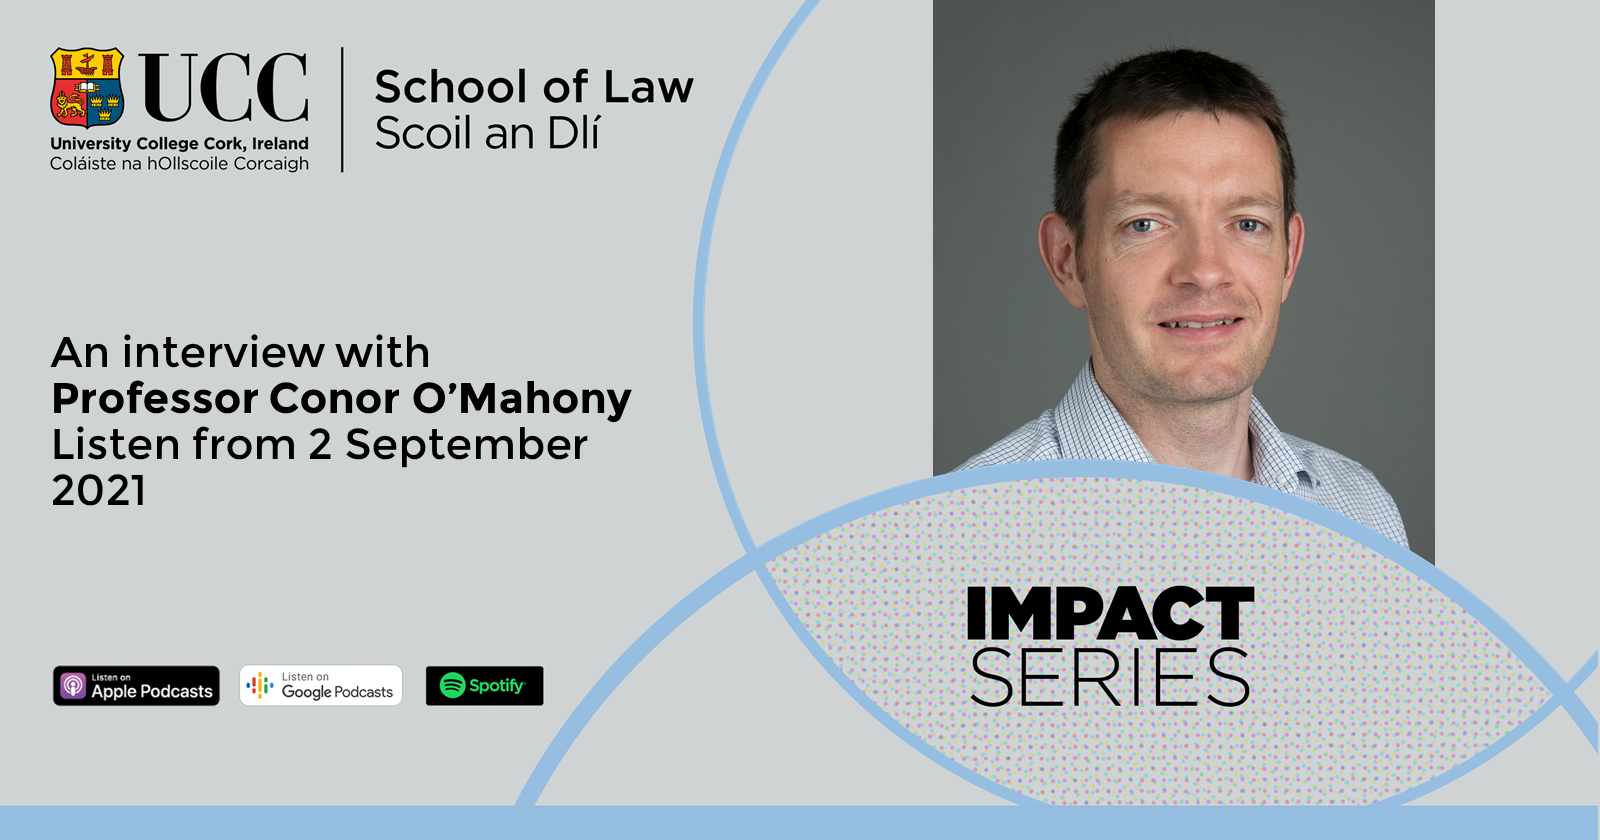 Professor Conor O’Mahony discusses his role as Special Rapporteur on Child Protection in the latest episode of UCC School of Law’s Impact Series